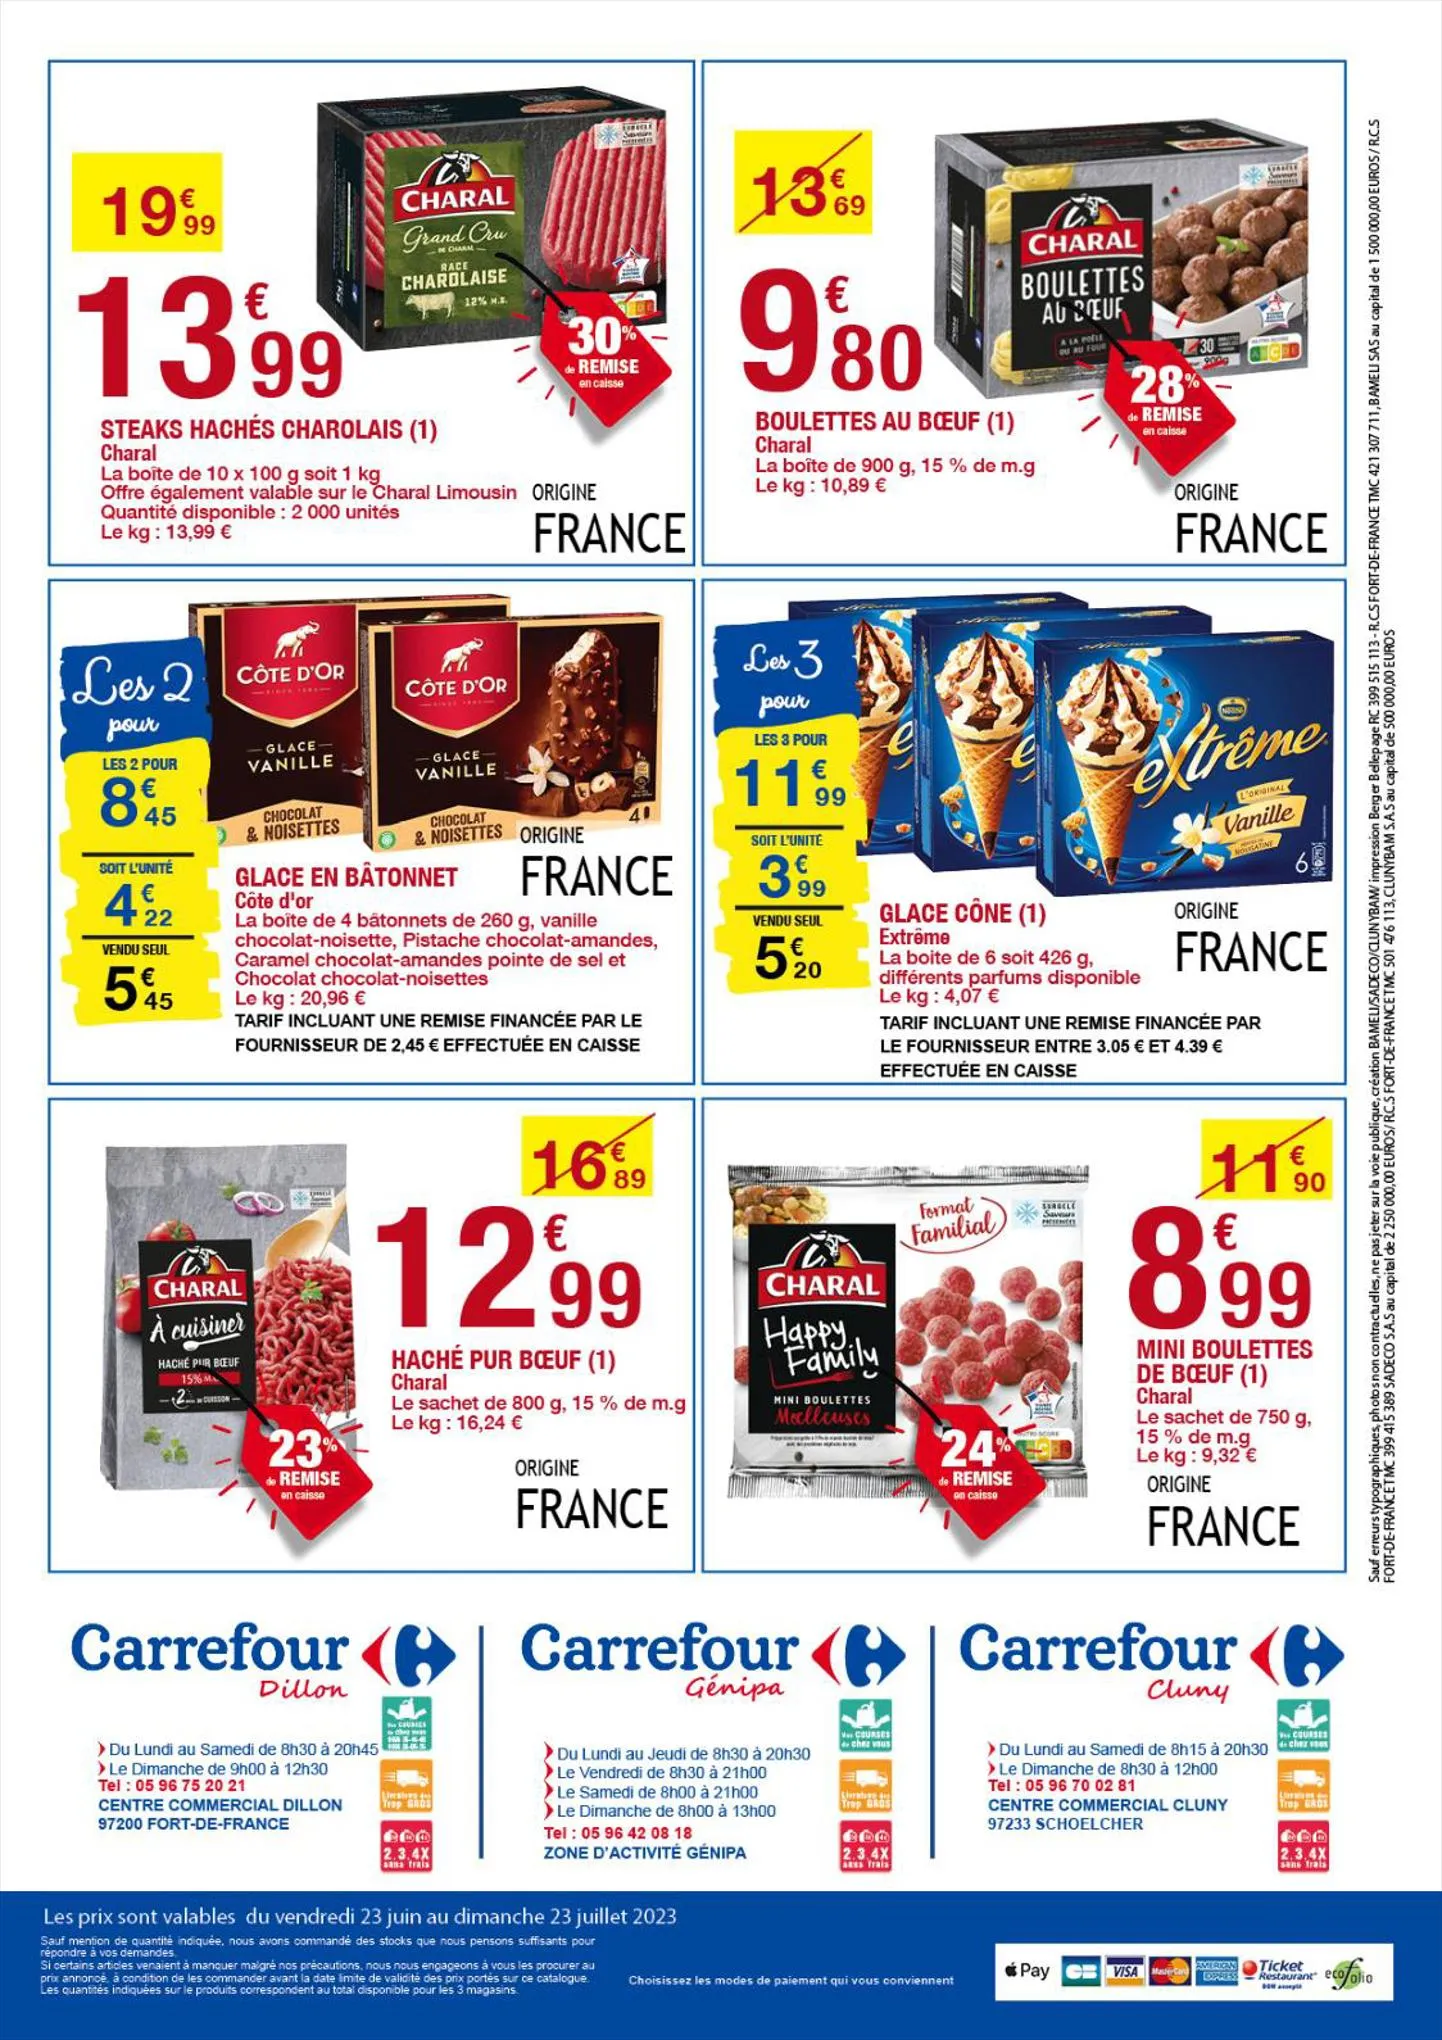 Catalogue Carrefour OP CACI 6317, page 00002